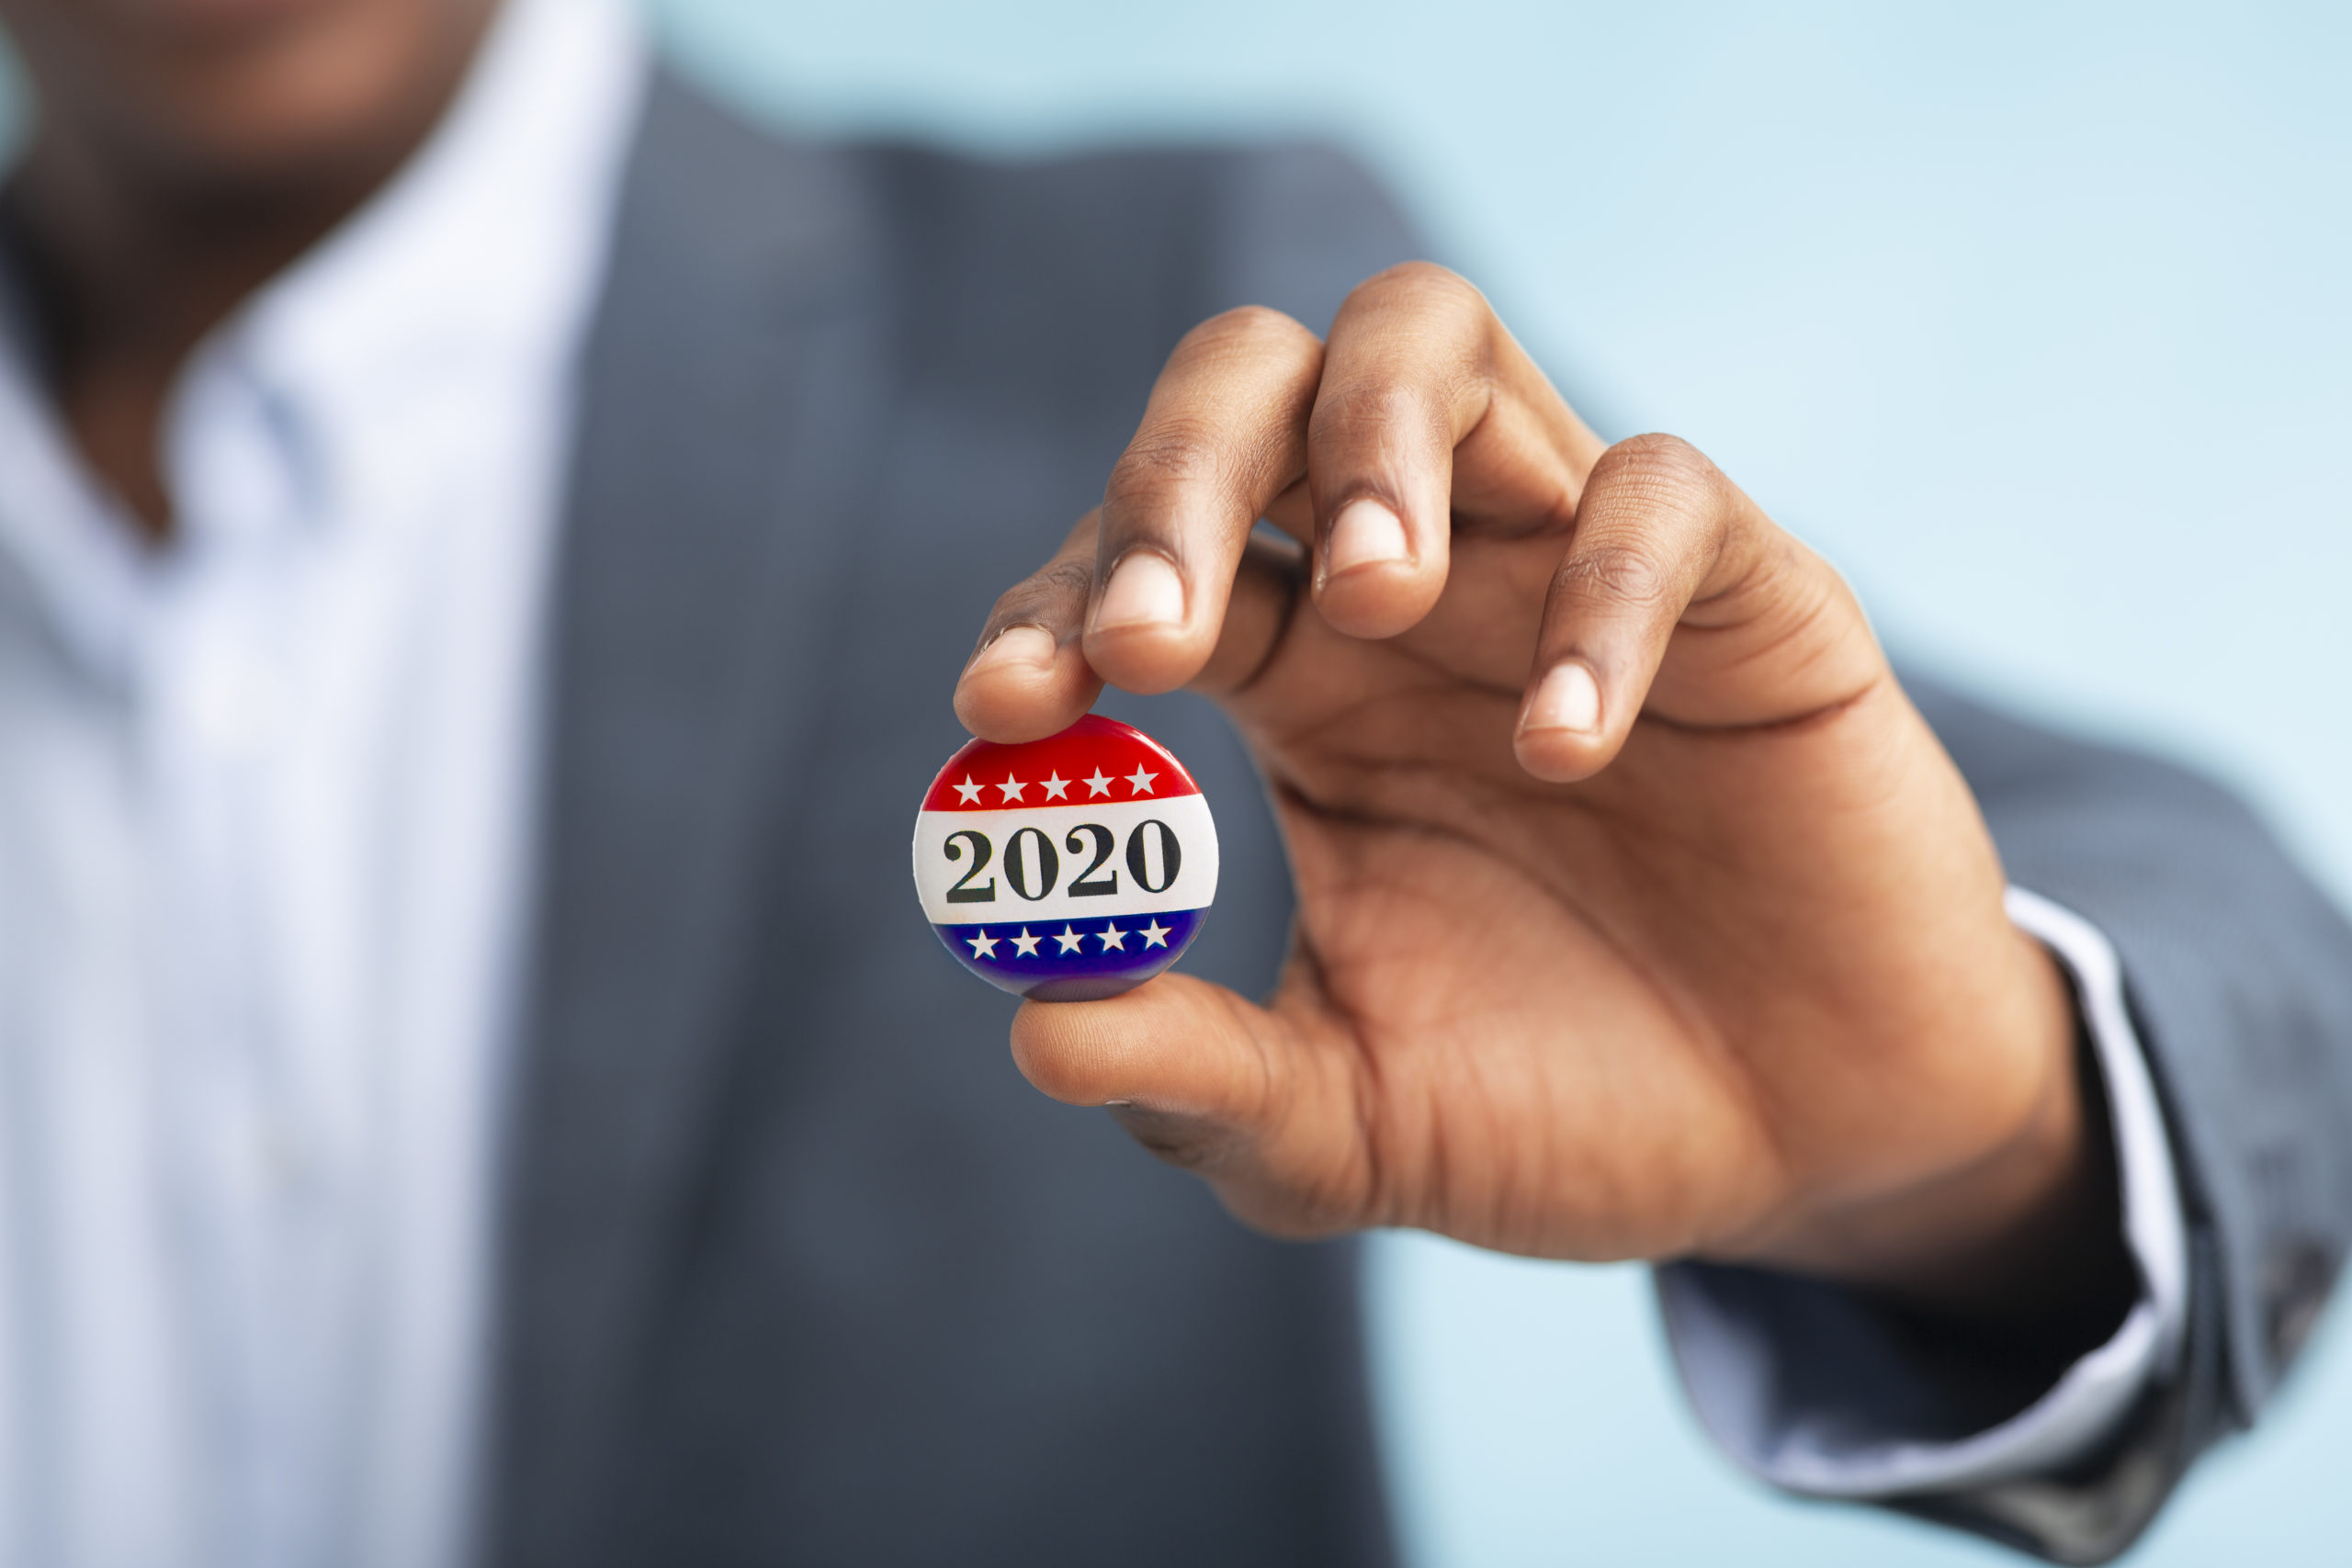 Voter turnout for 2020 election and healthcare | Corporate Synergies